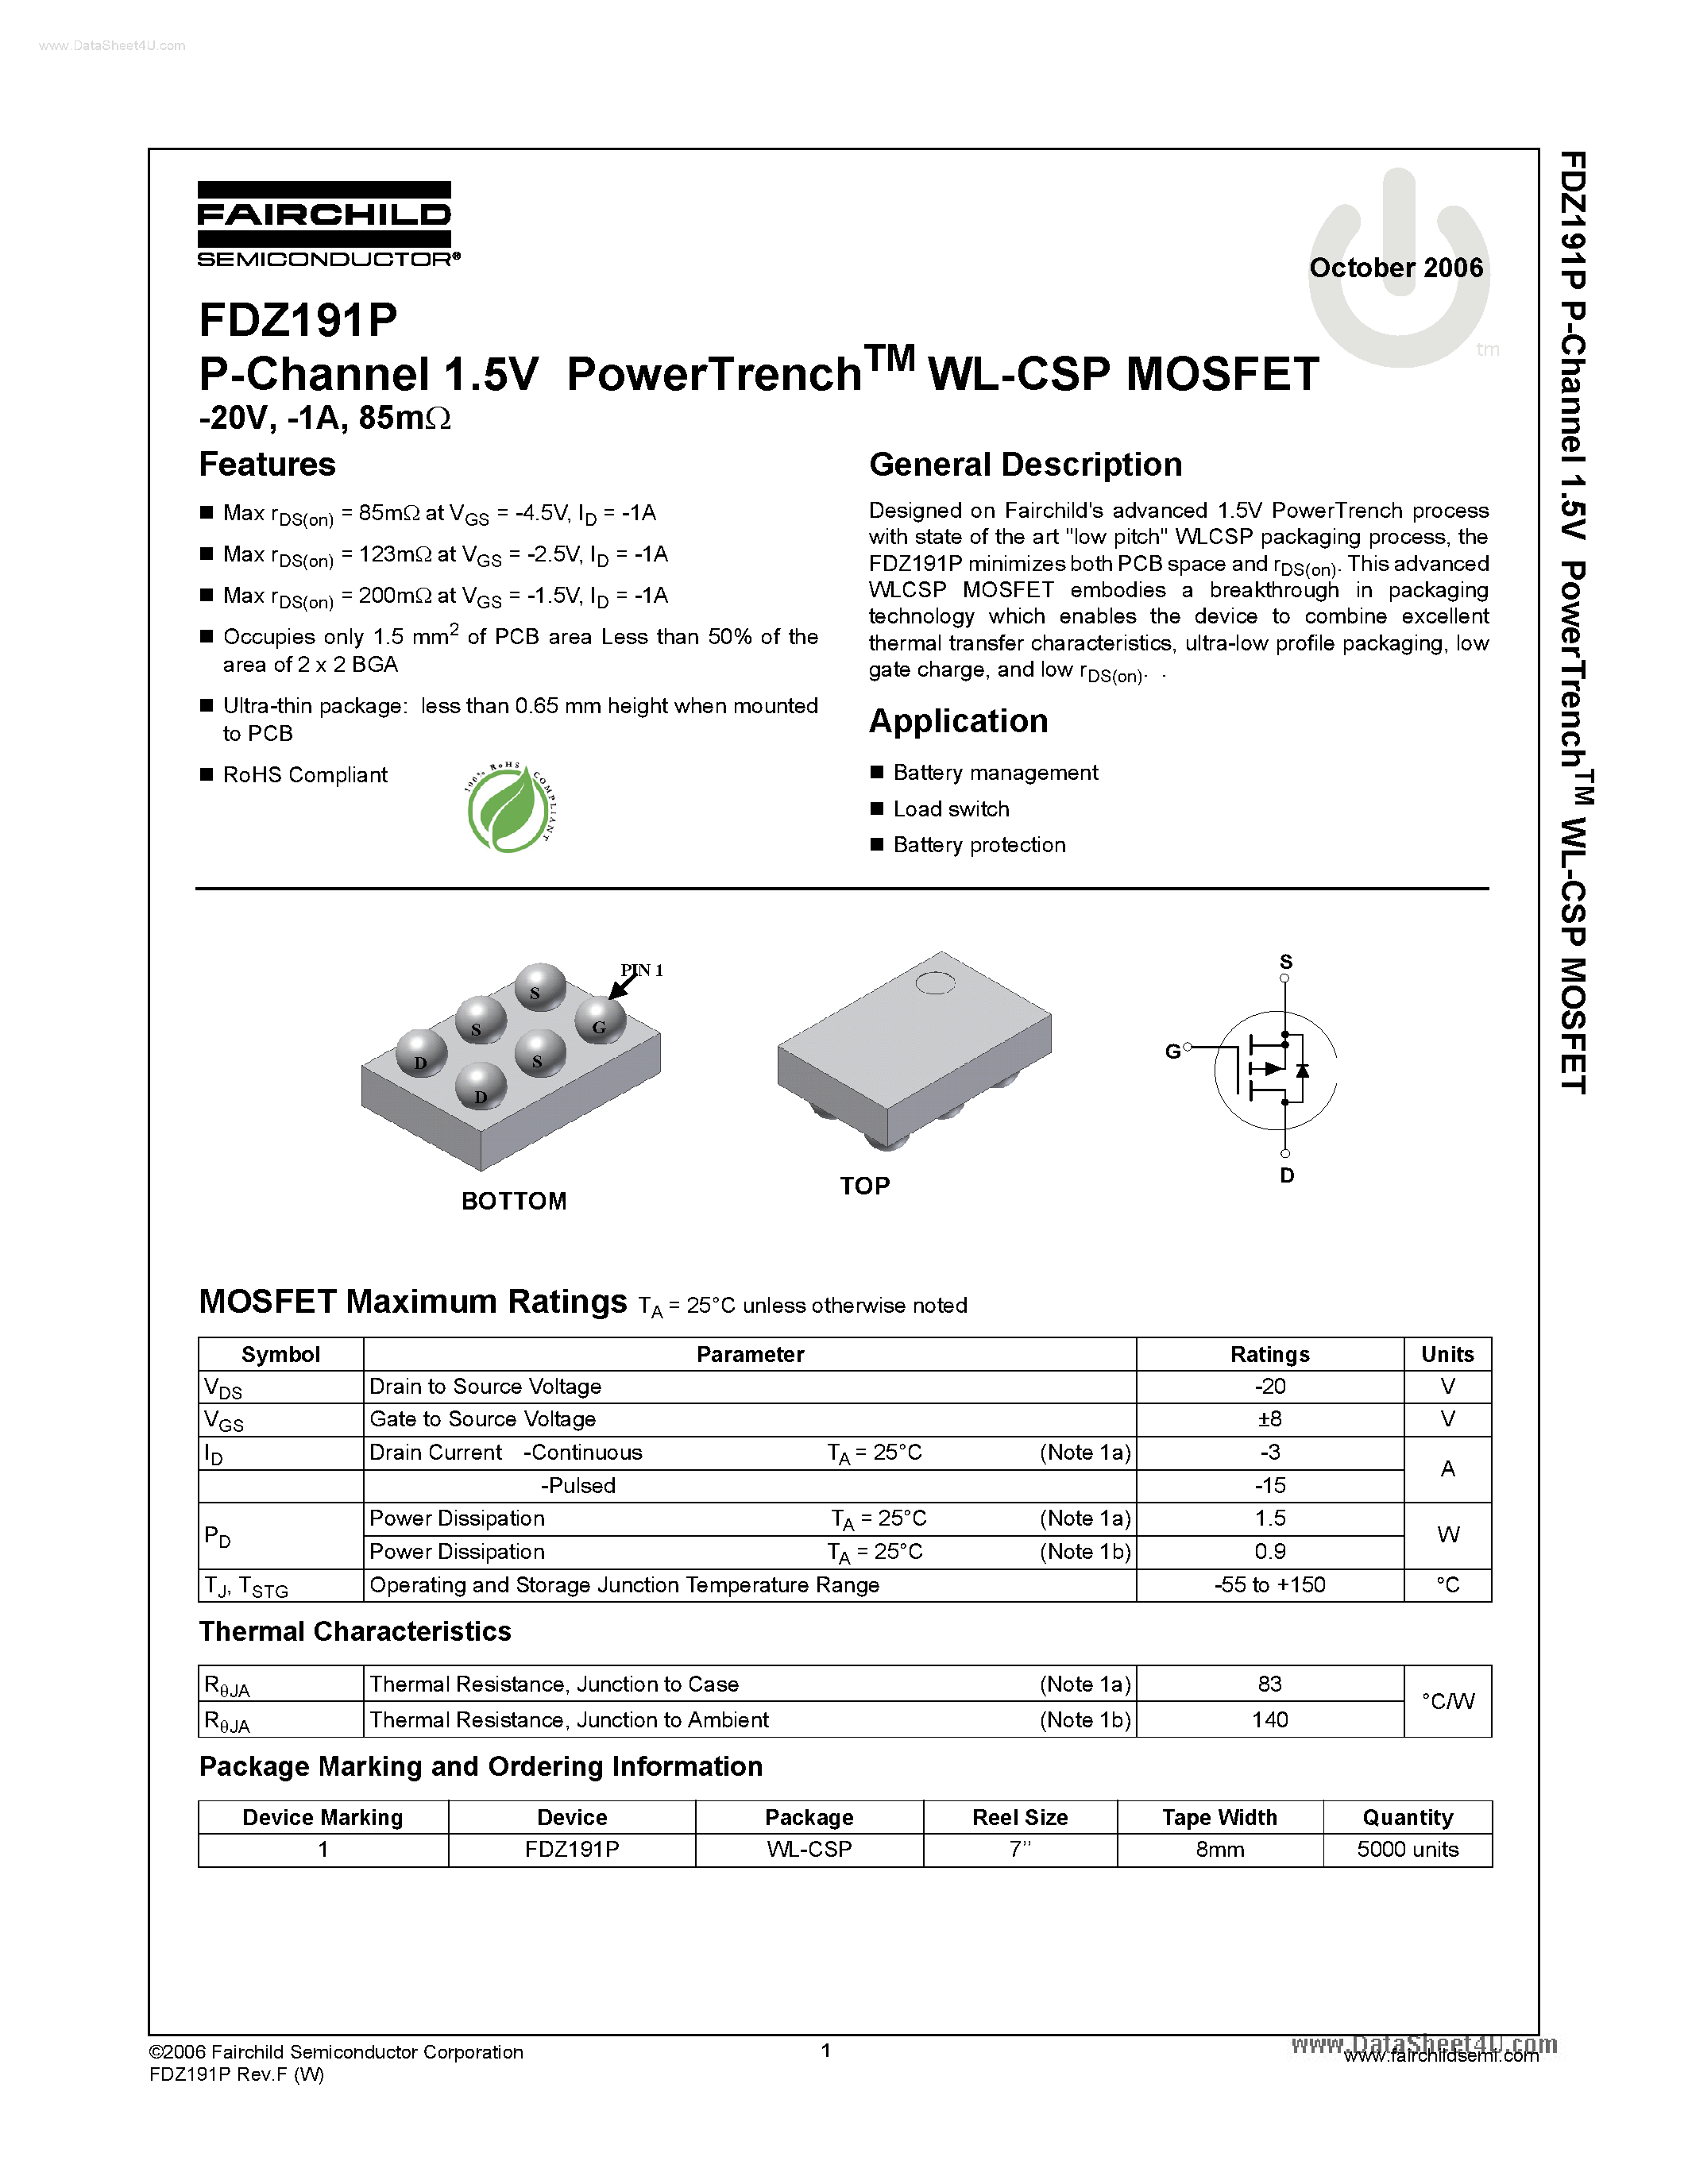 Datasheet FDZ191P - P-Channel 1.5V PowerTrench WL-CSP MOSFET page 1